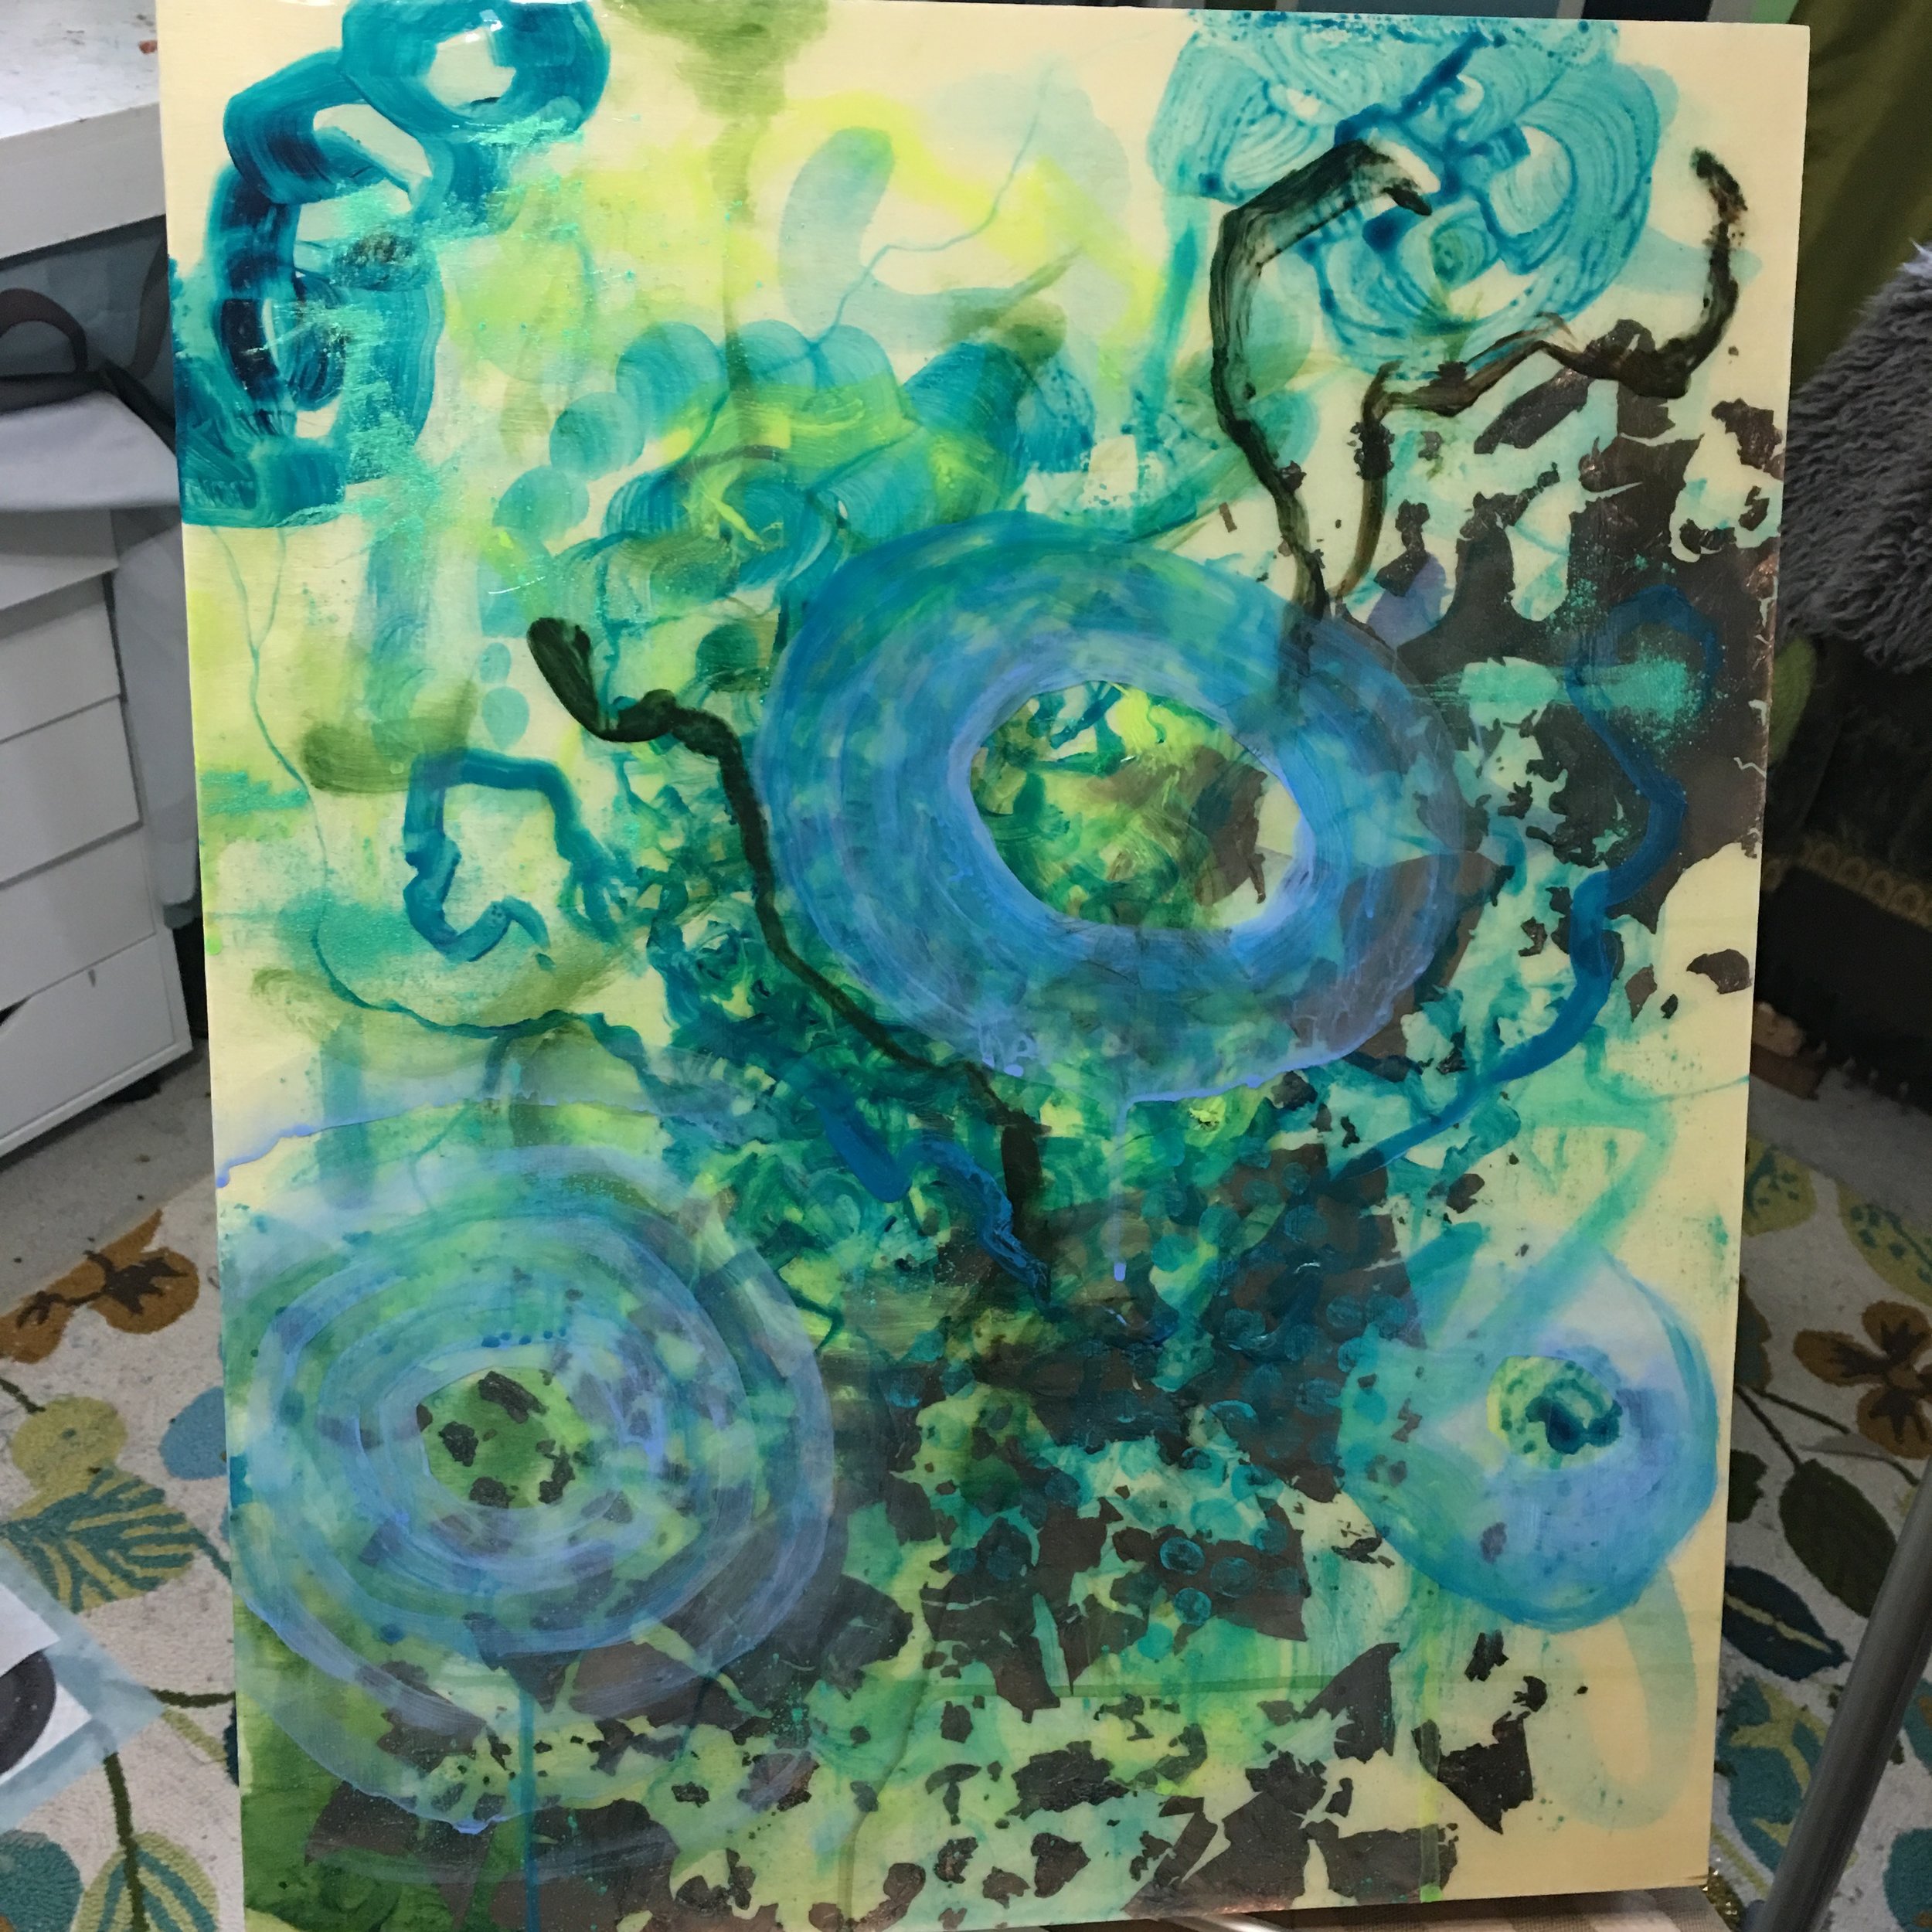 Not sure what the painting will be at this point, but it makes me think water.  